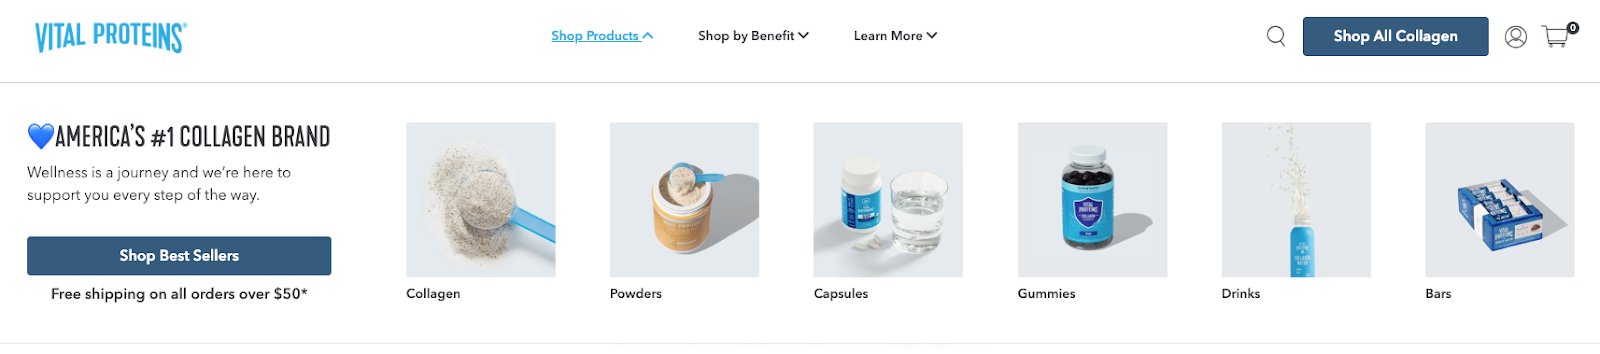 “Shop Products” tab